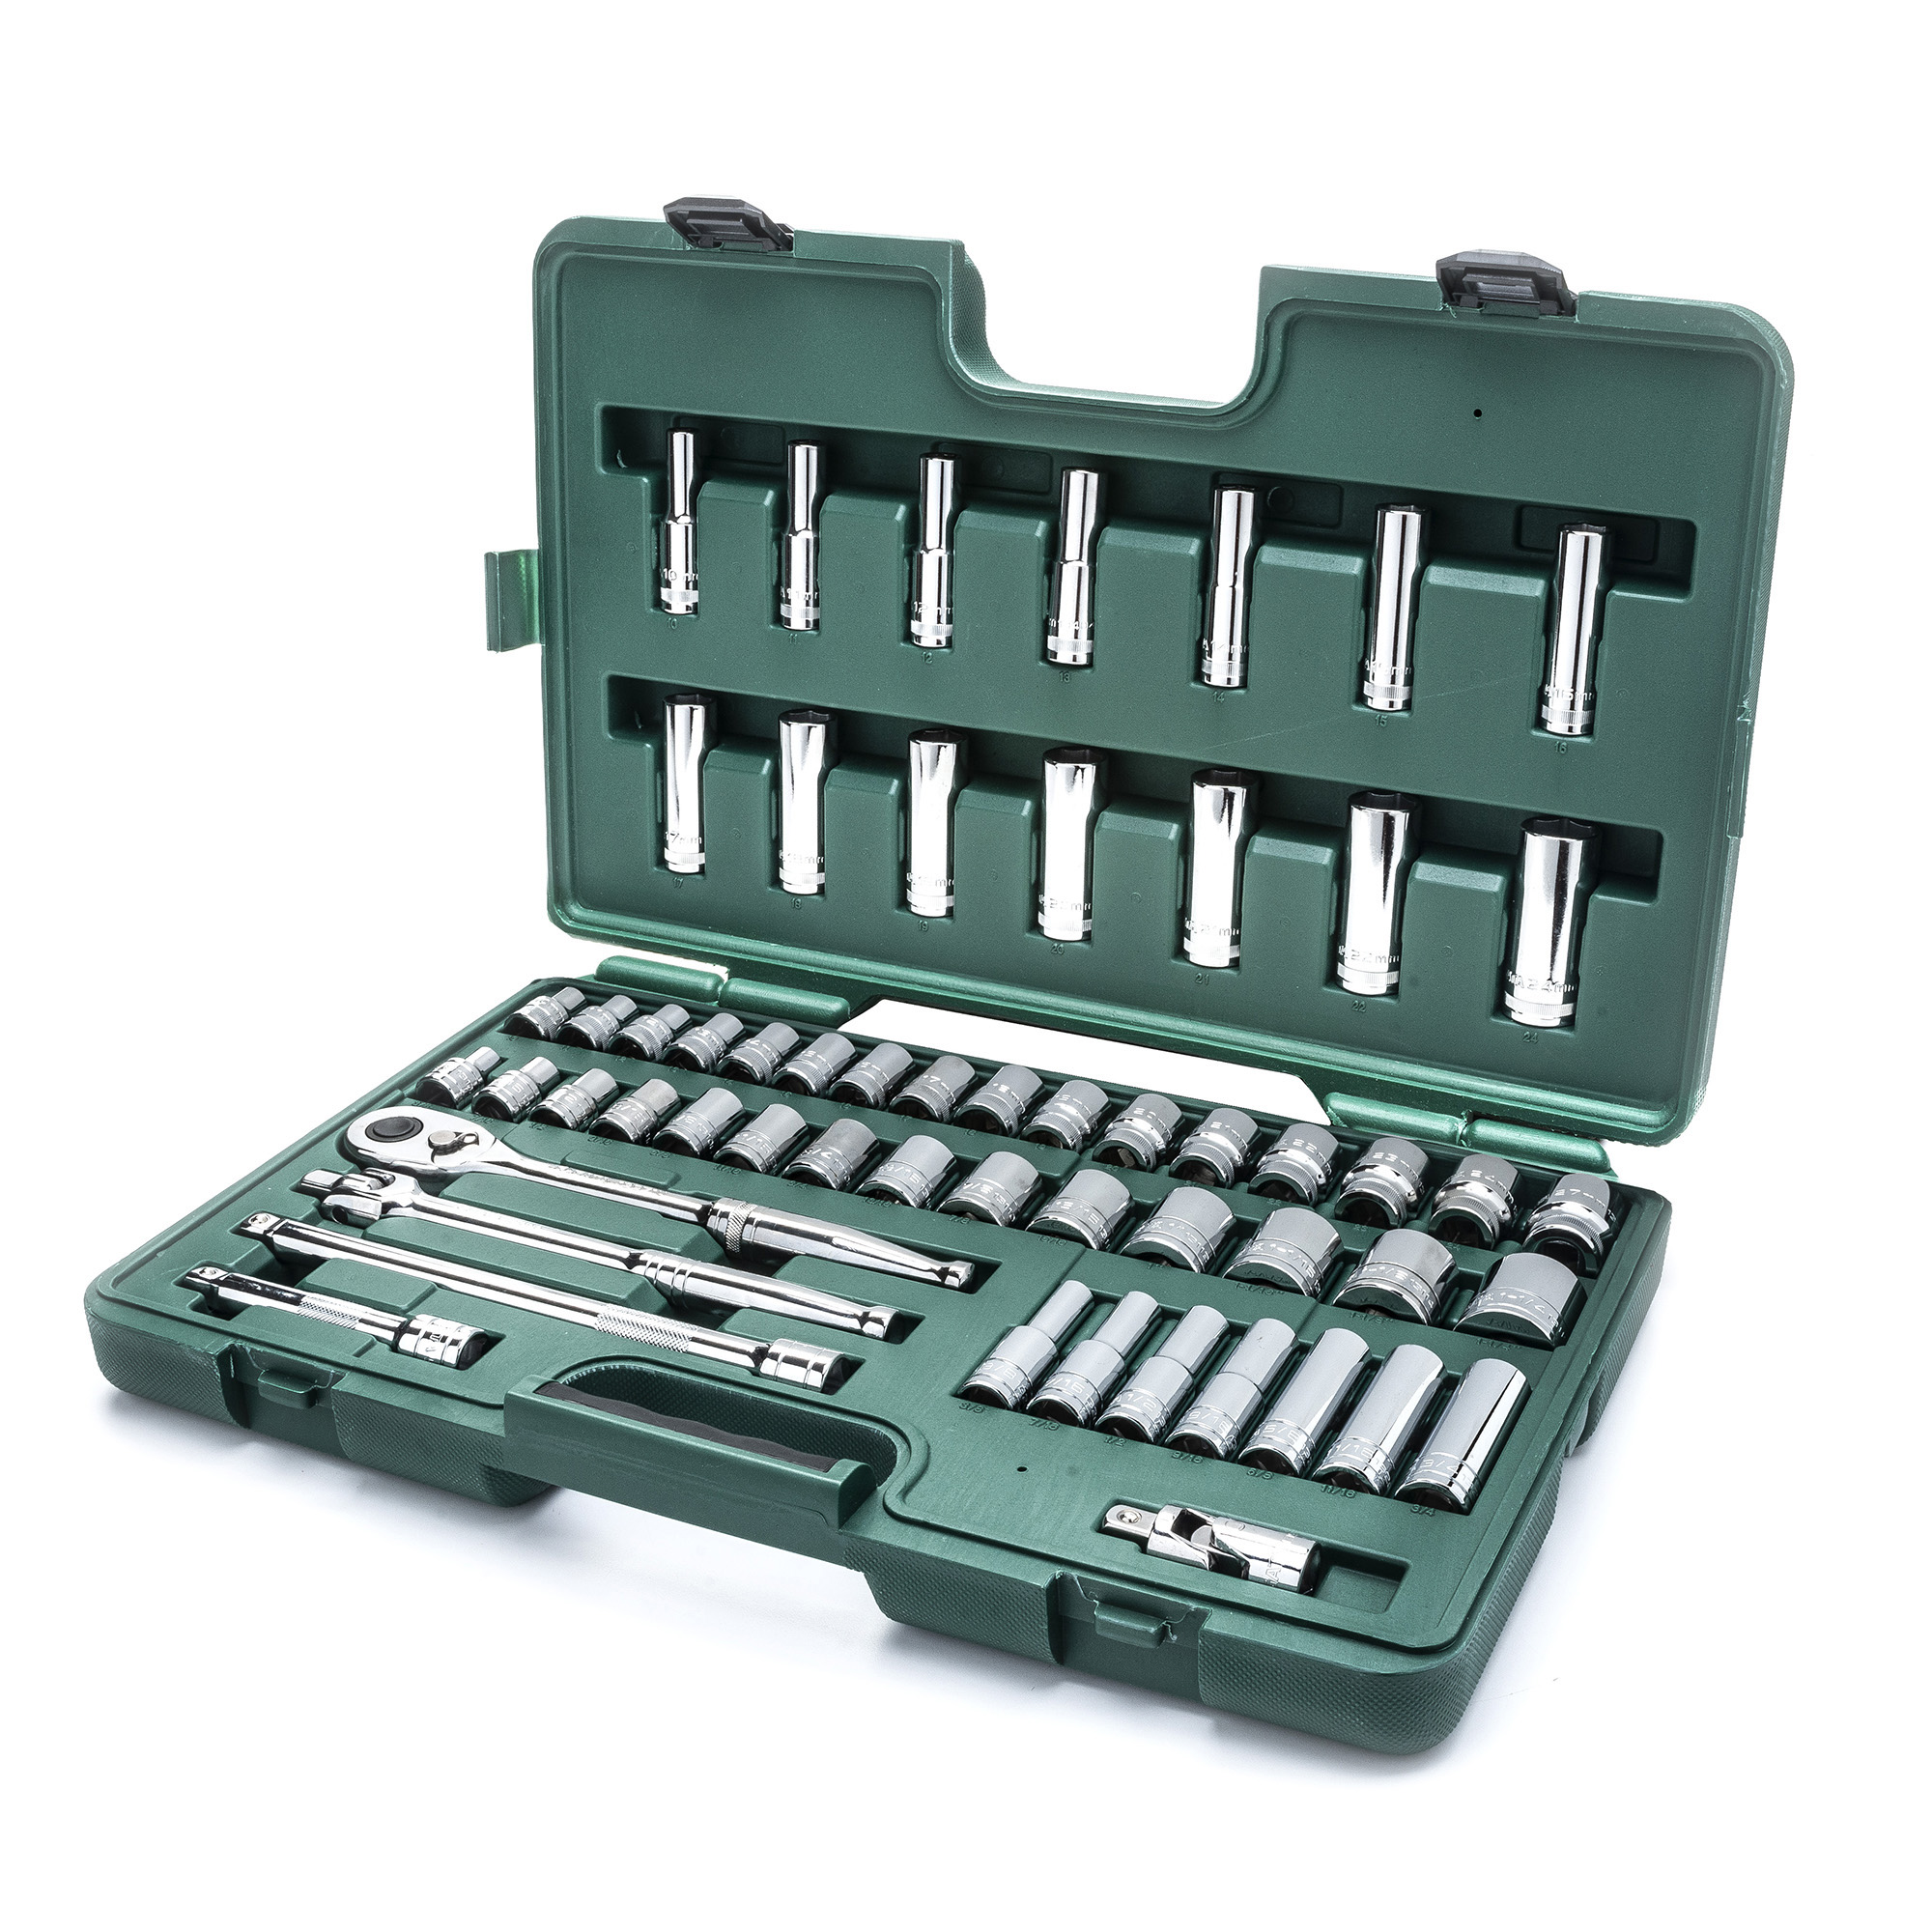 Complete tool set with 72-tooth quick-release ratchet and two extension bars (5 and 10-inch), a universal joint, and a range of standard and deep size sockets ranging from 3/8-inch to 1-1/4-inch.